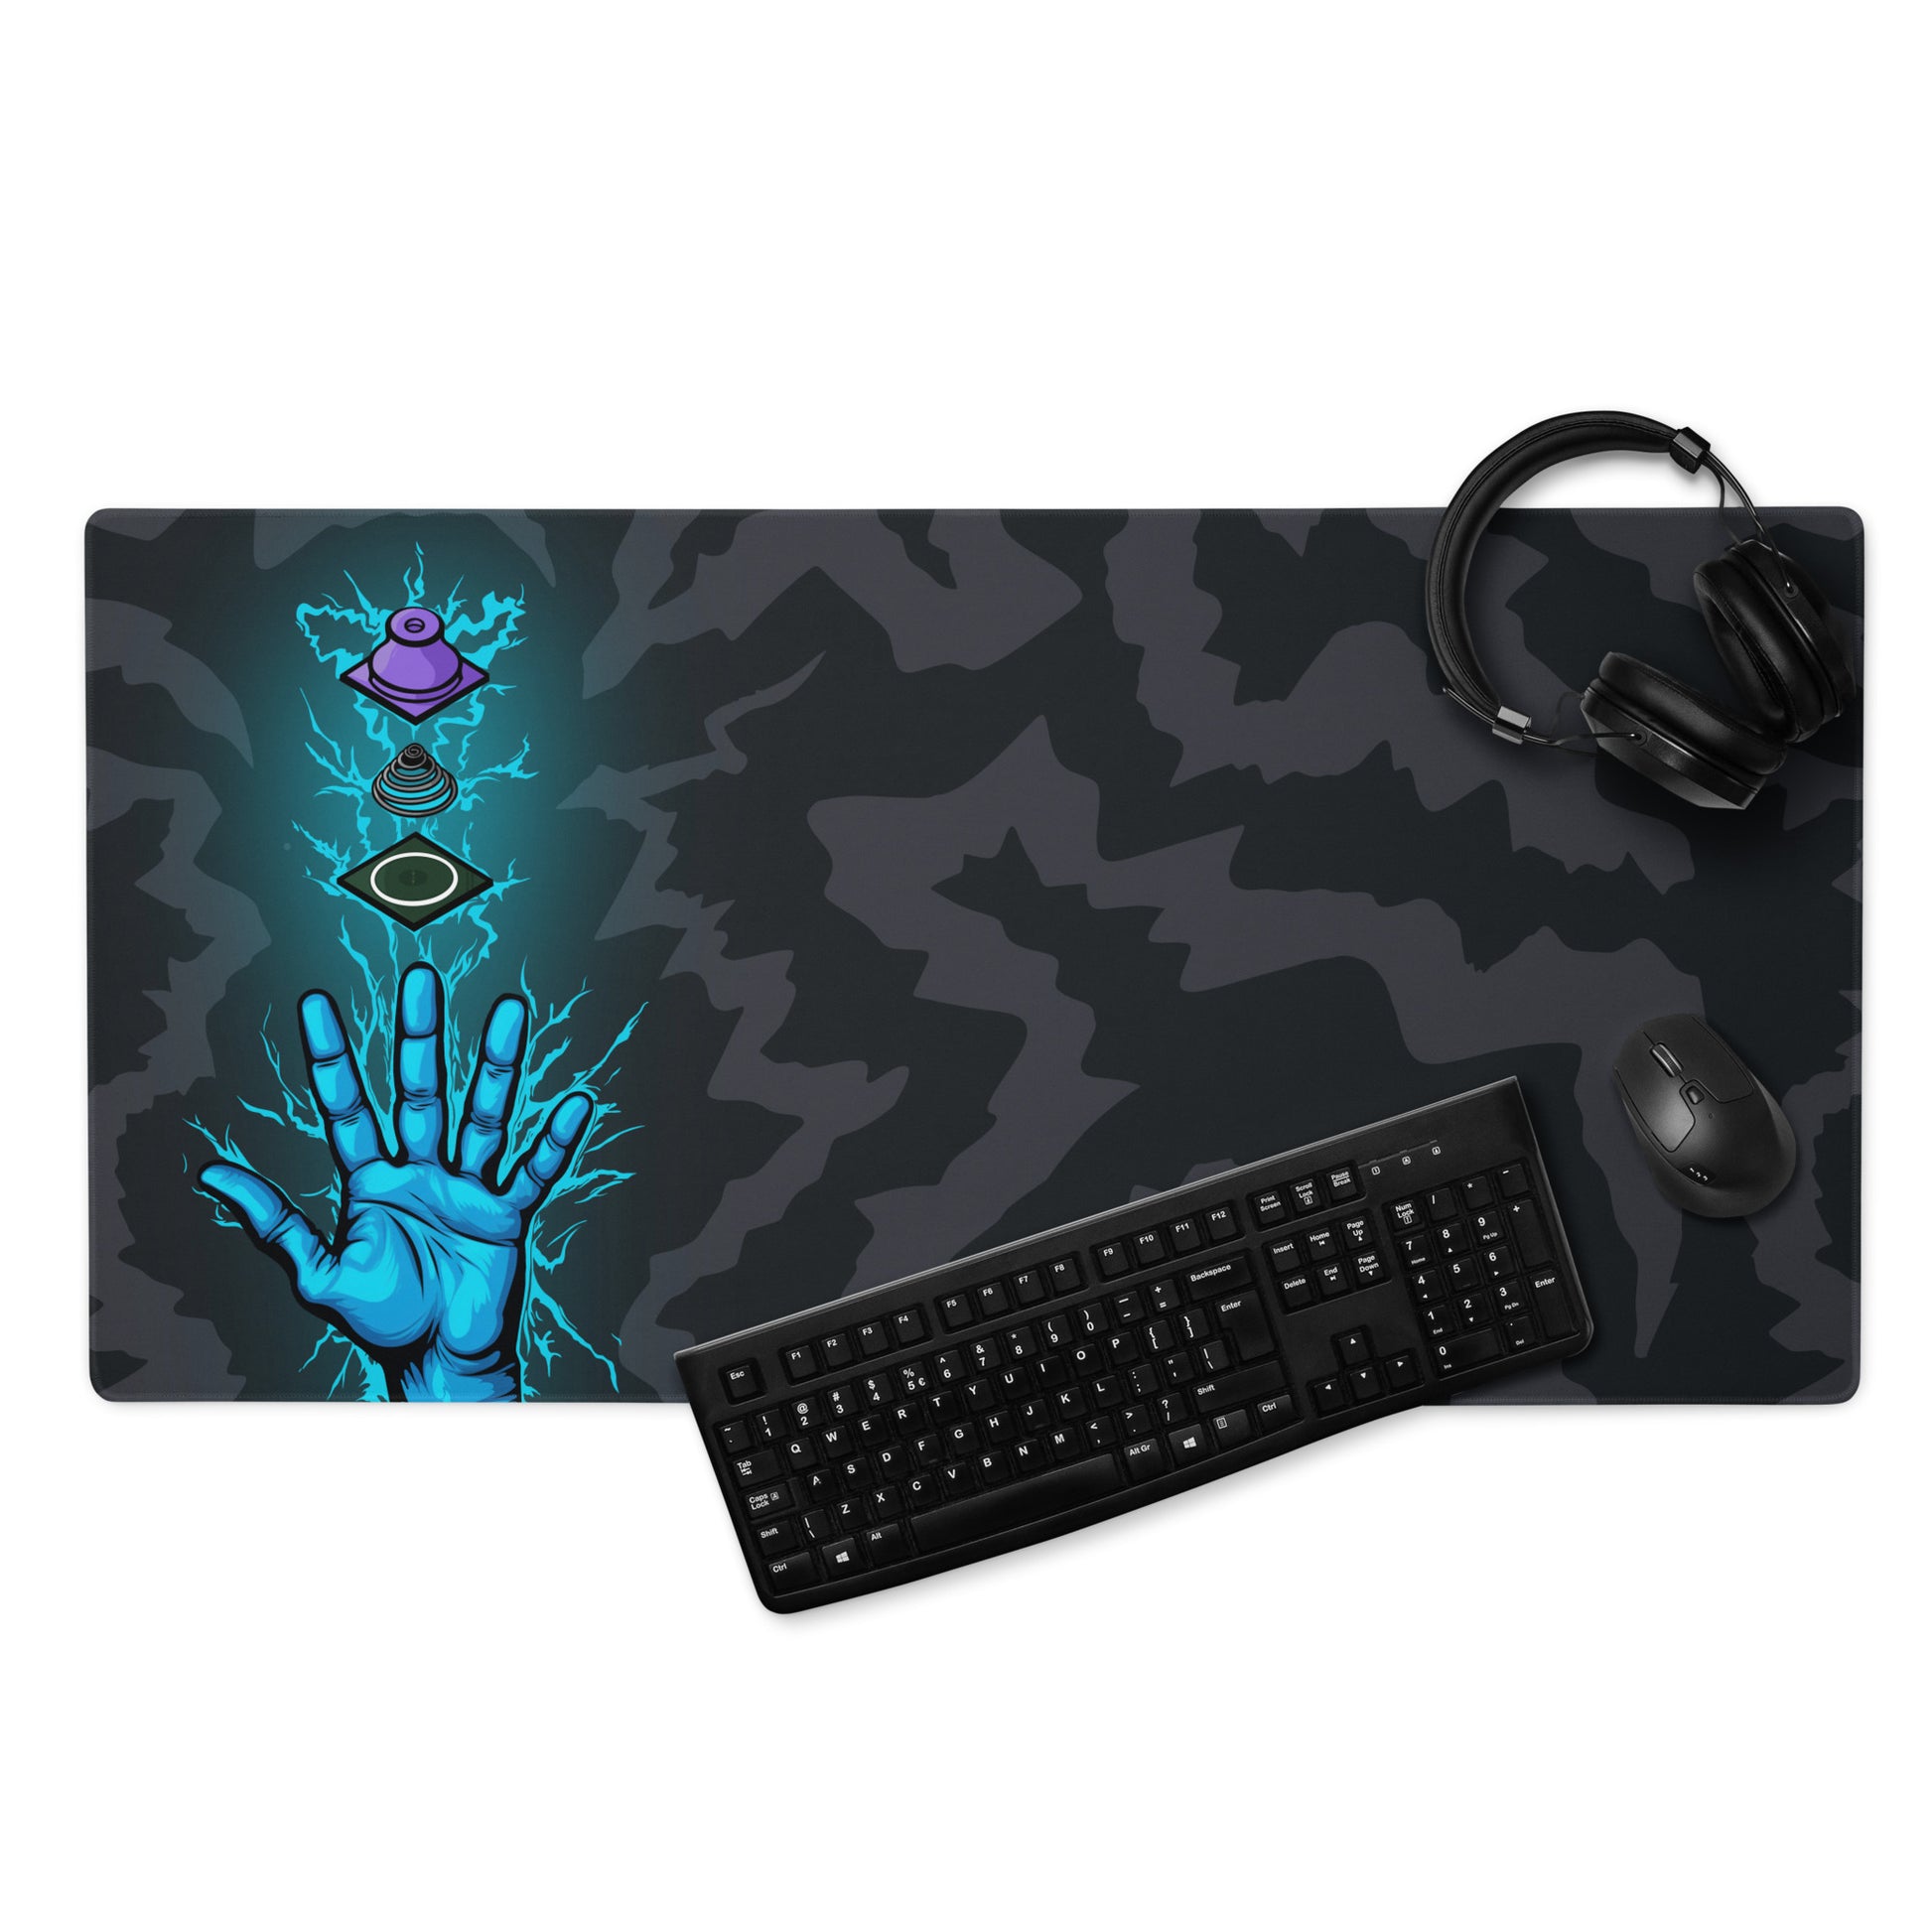 A 36" x 18" desk pad with a hand touching a deconstructed Topre switch surrounded by electricity displayed with a keyboard, headphones and a mouse. Black and Charcoal in color.